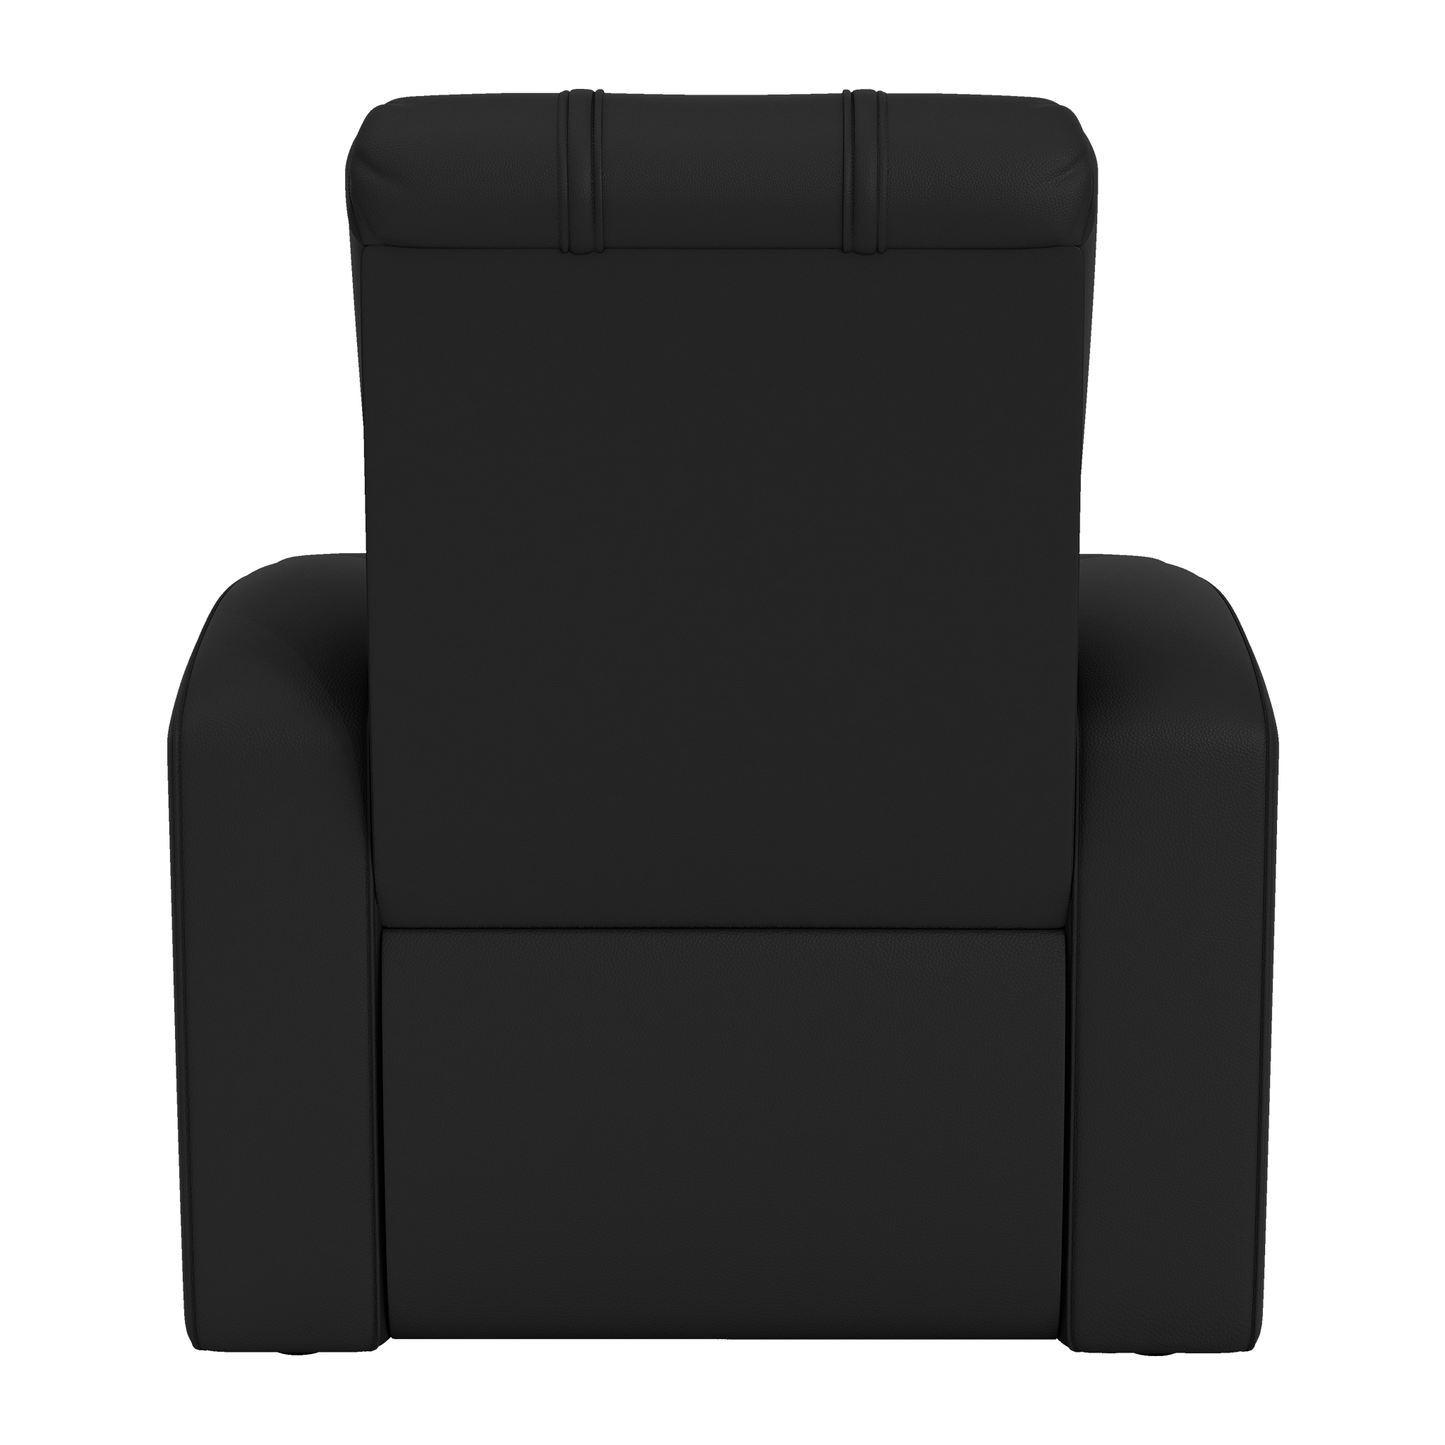 Relax Home Theater Recliner with San Diego Padres Secondary Logo